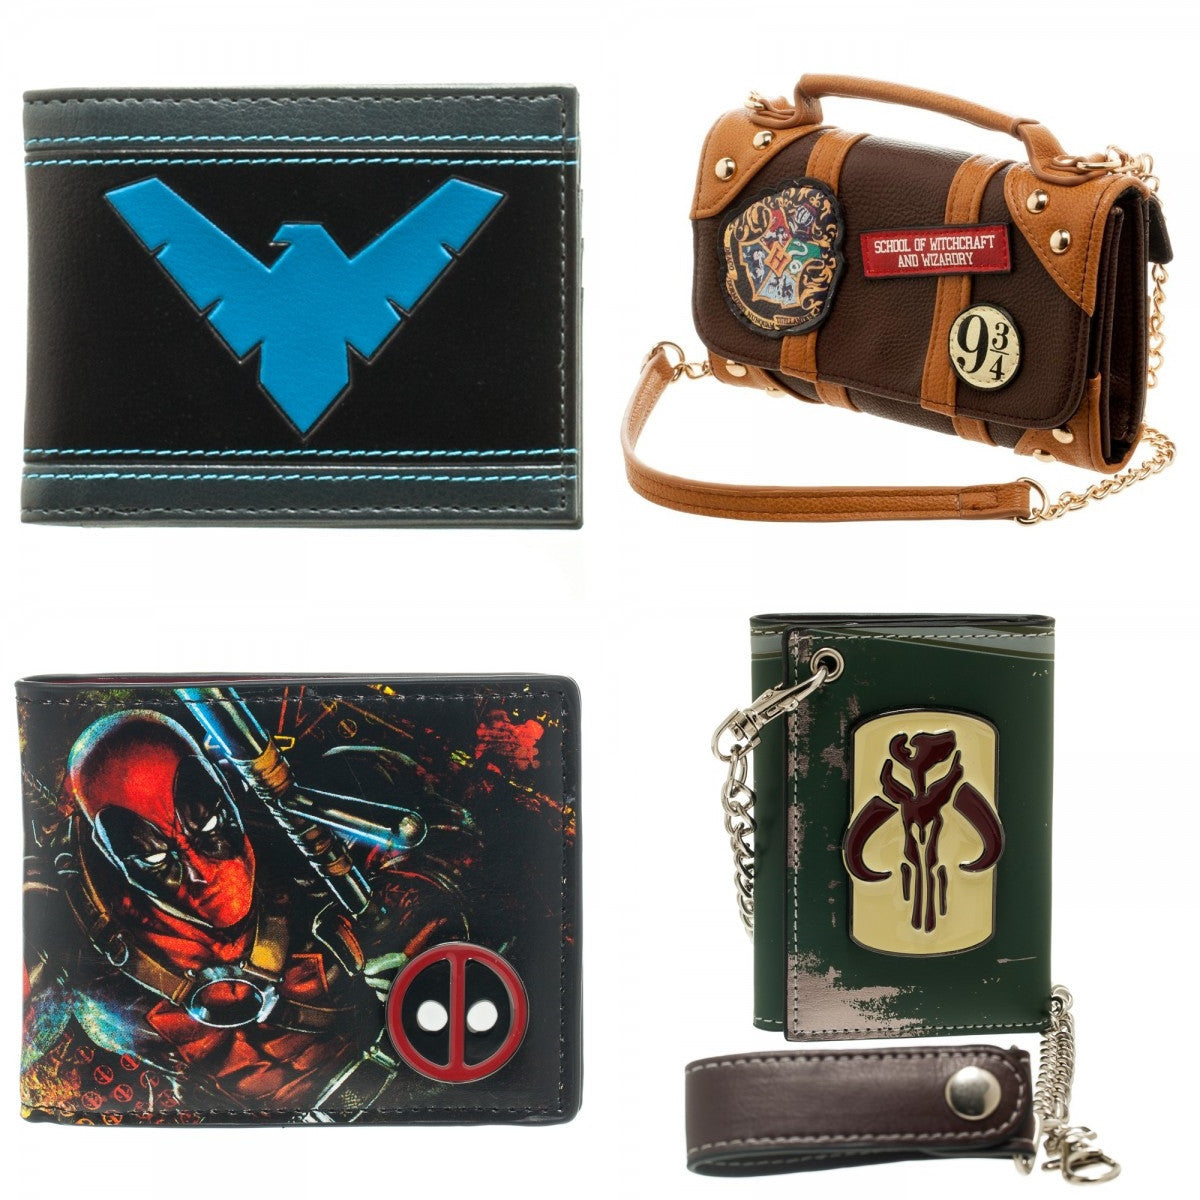 Four Wallets representing our nerdy, geeky, spooky, creepy bifolds, trifolds, satchels, clutch and flap wallets